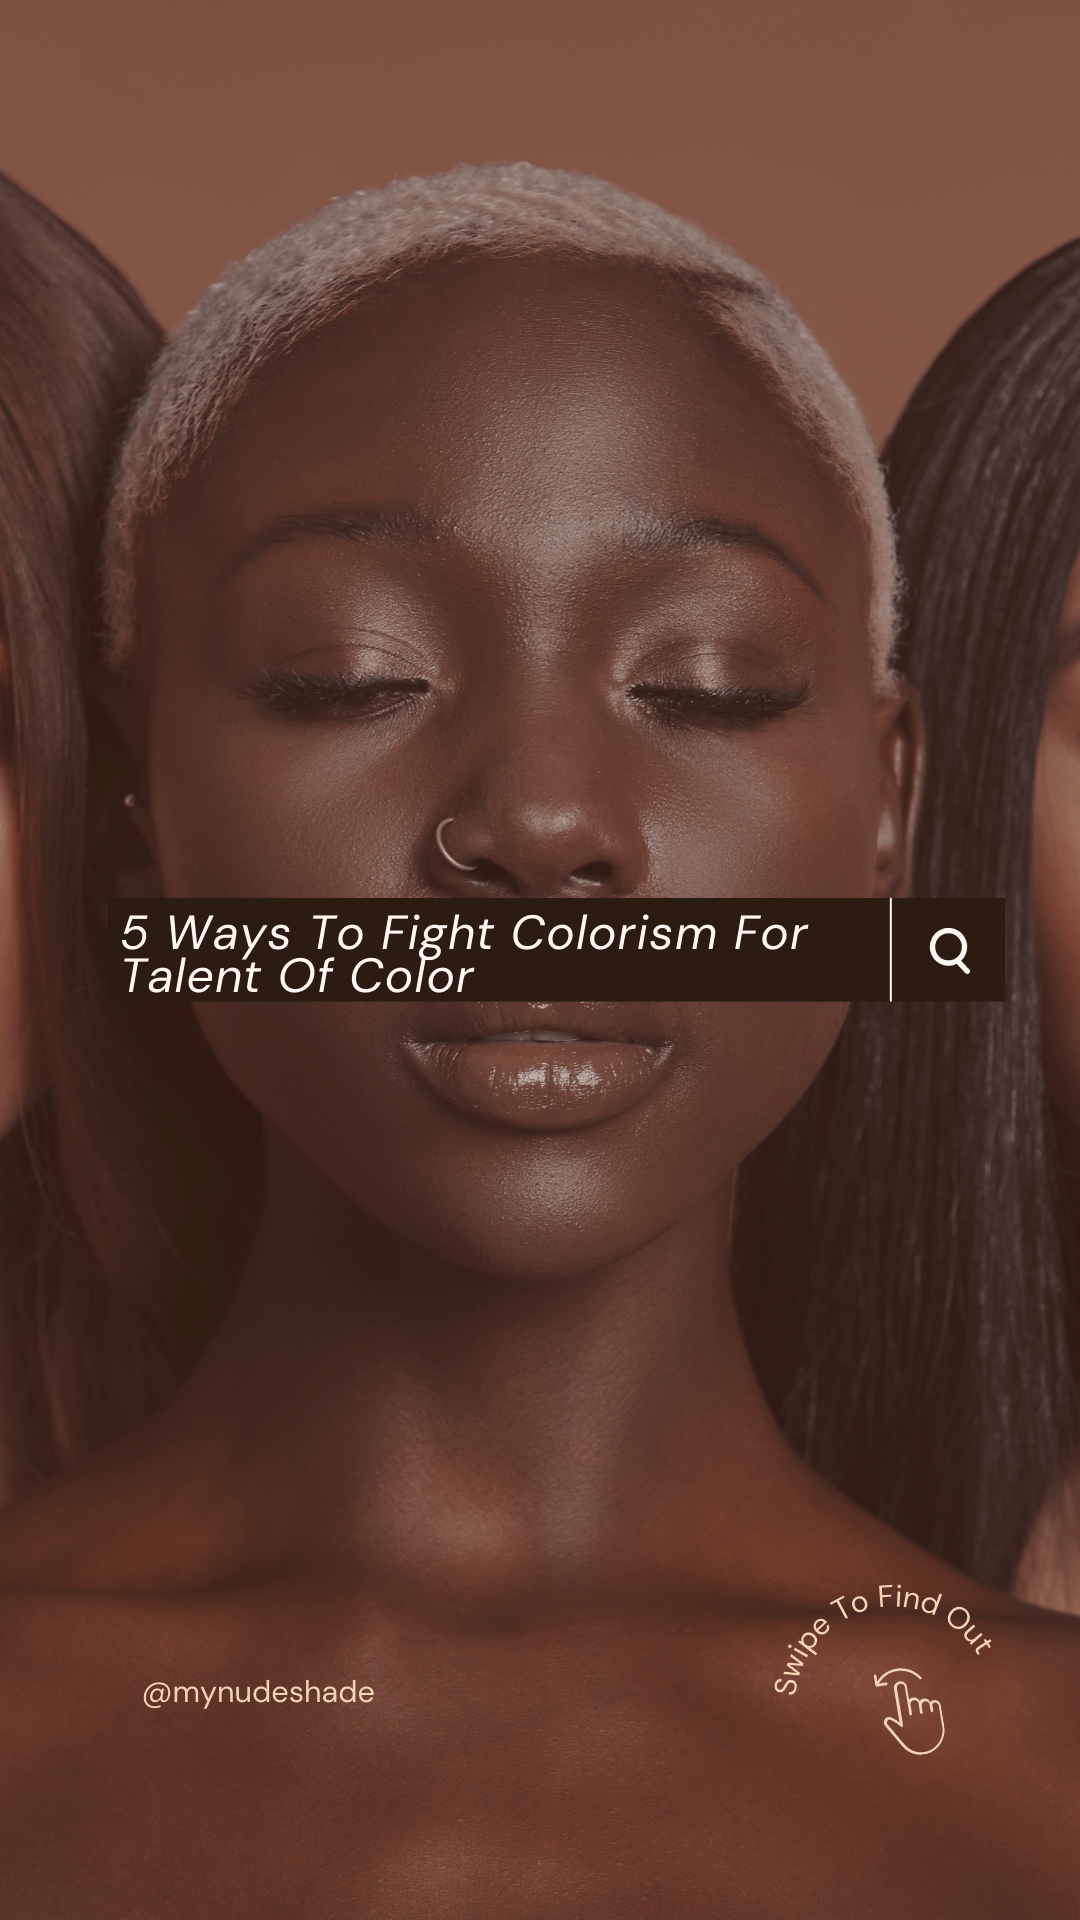 5 Ways To Fight Colorism For Talent Of Color